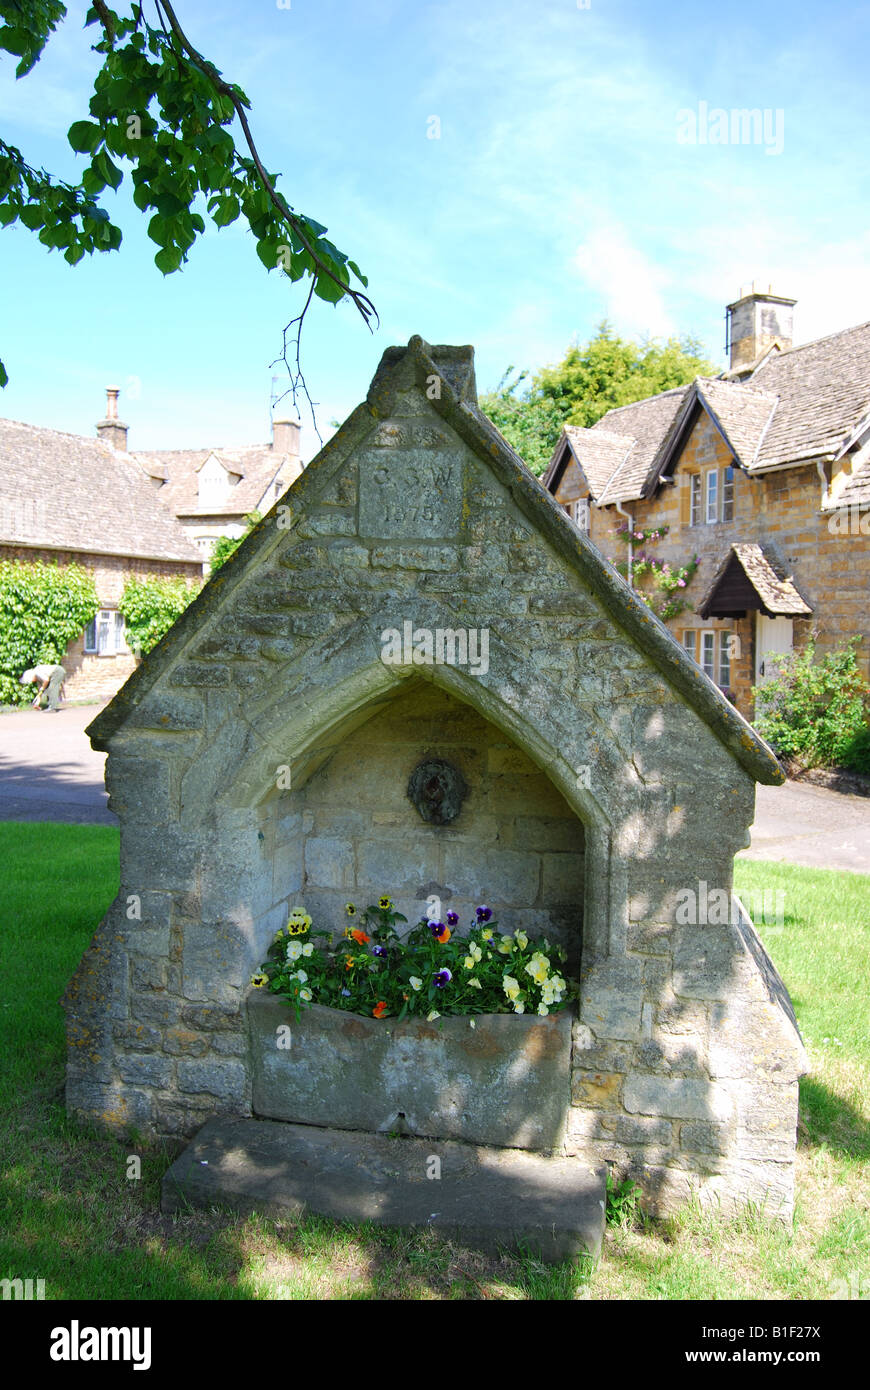 Vieille fontaine, Lower Slaughter, Gloucestershire, Cotswolds, Angleterre, Royaume-Uni Banque D'Images